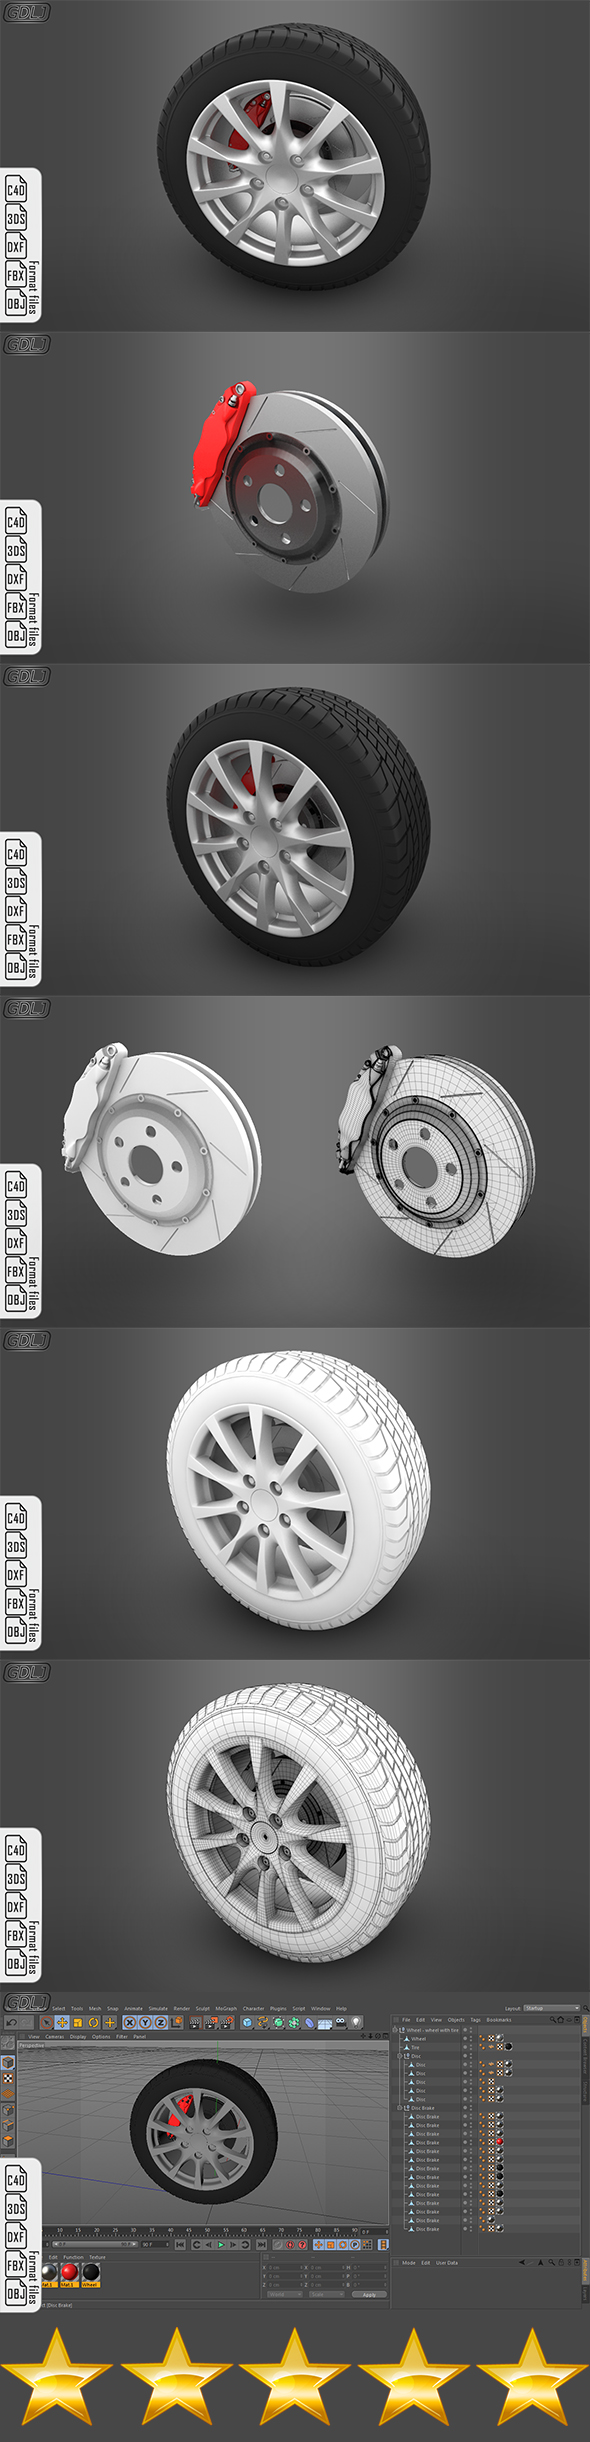 Wheel with tire - 3Docean 23078128